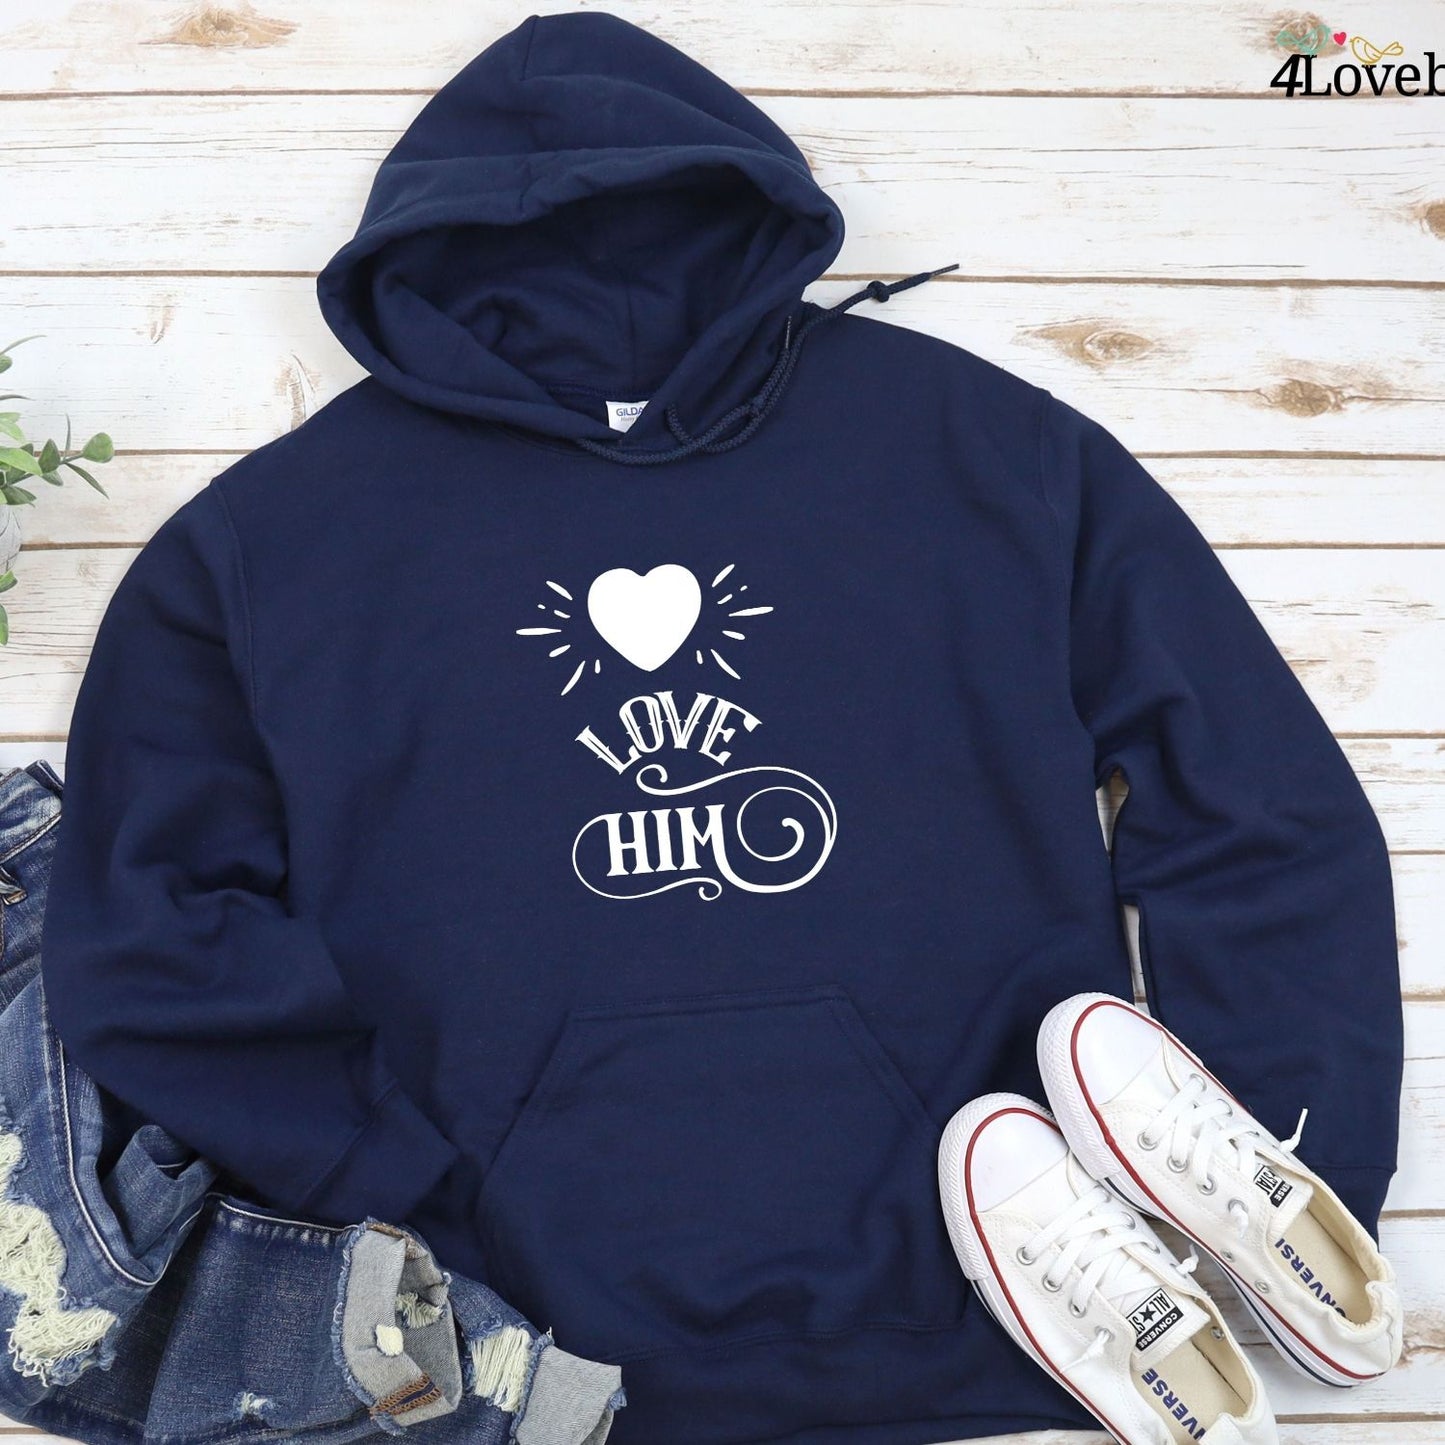 Adorable His & Hers Matching Set - Valentine Couple's Gift, Expressing Love - Fun Outfits